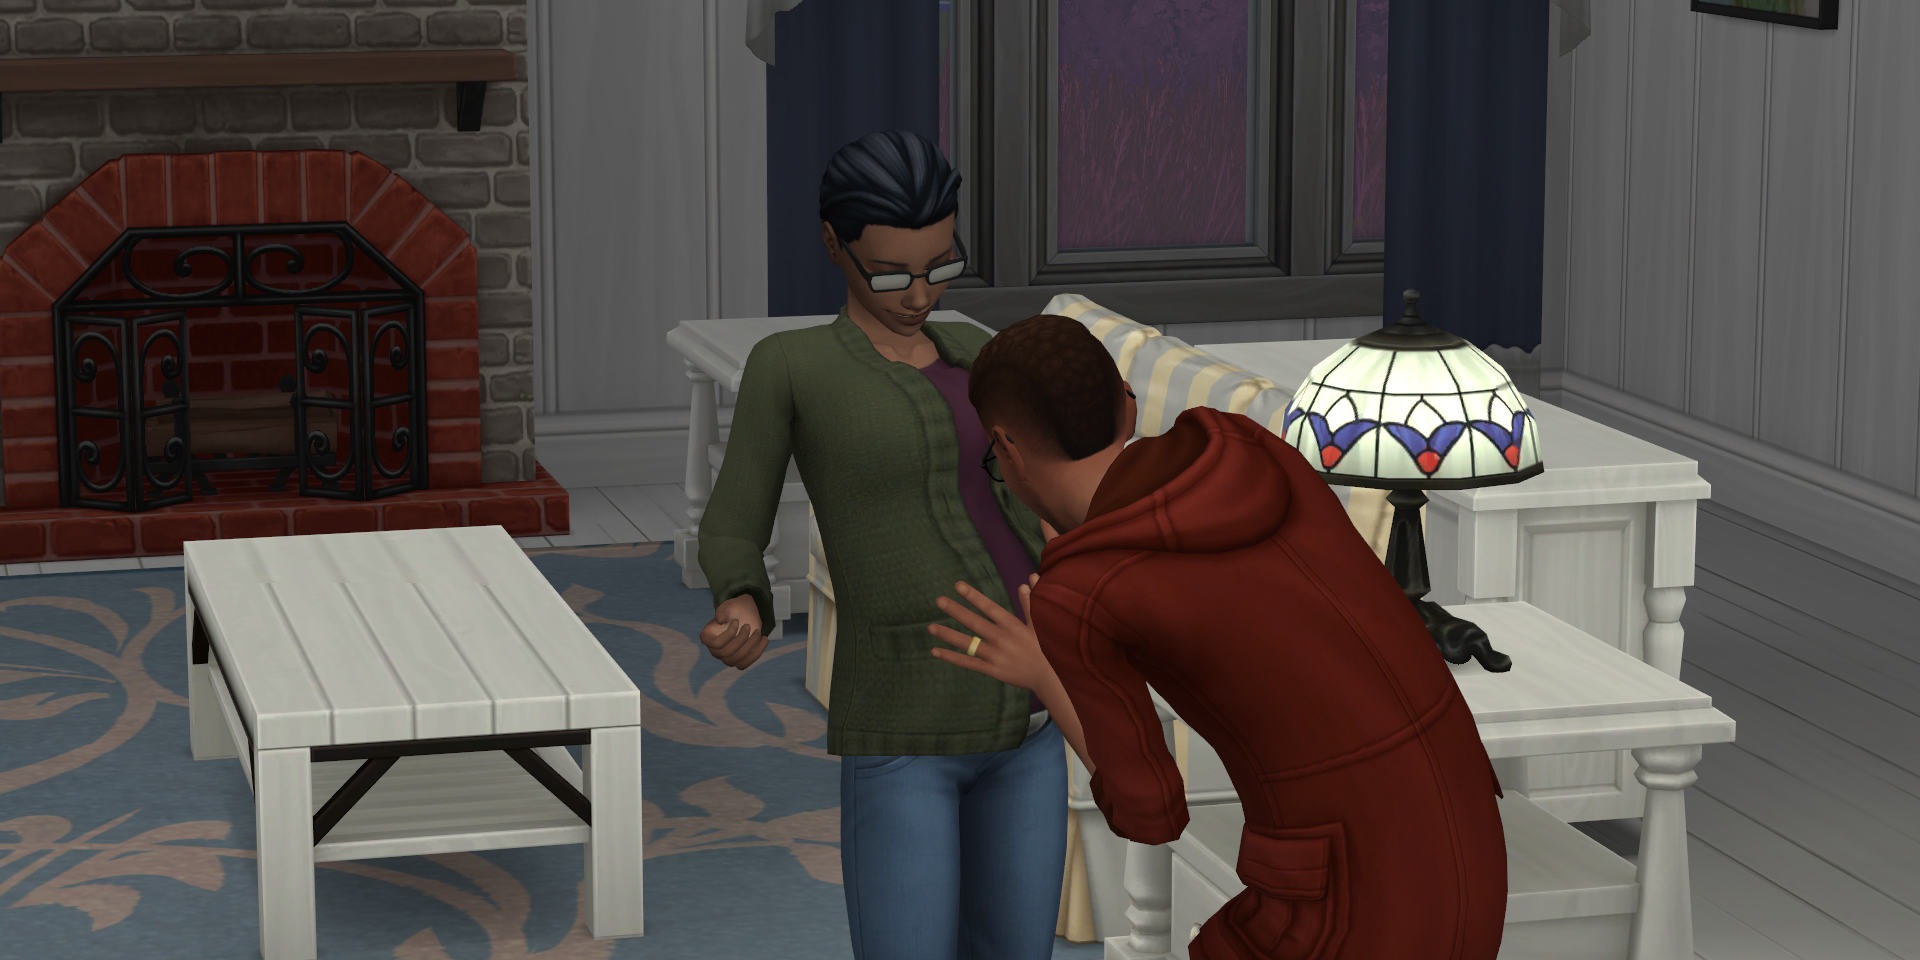 The Delgato couple is pregnant in the Sims 4, Justin feels his wife's belly